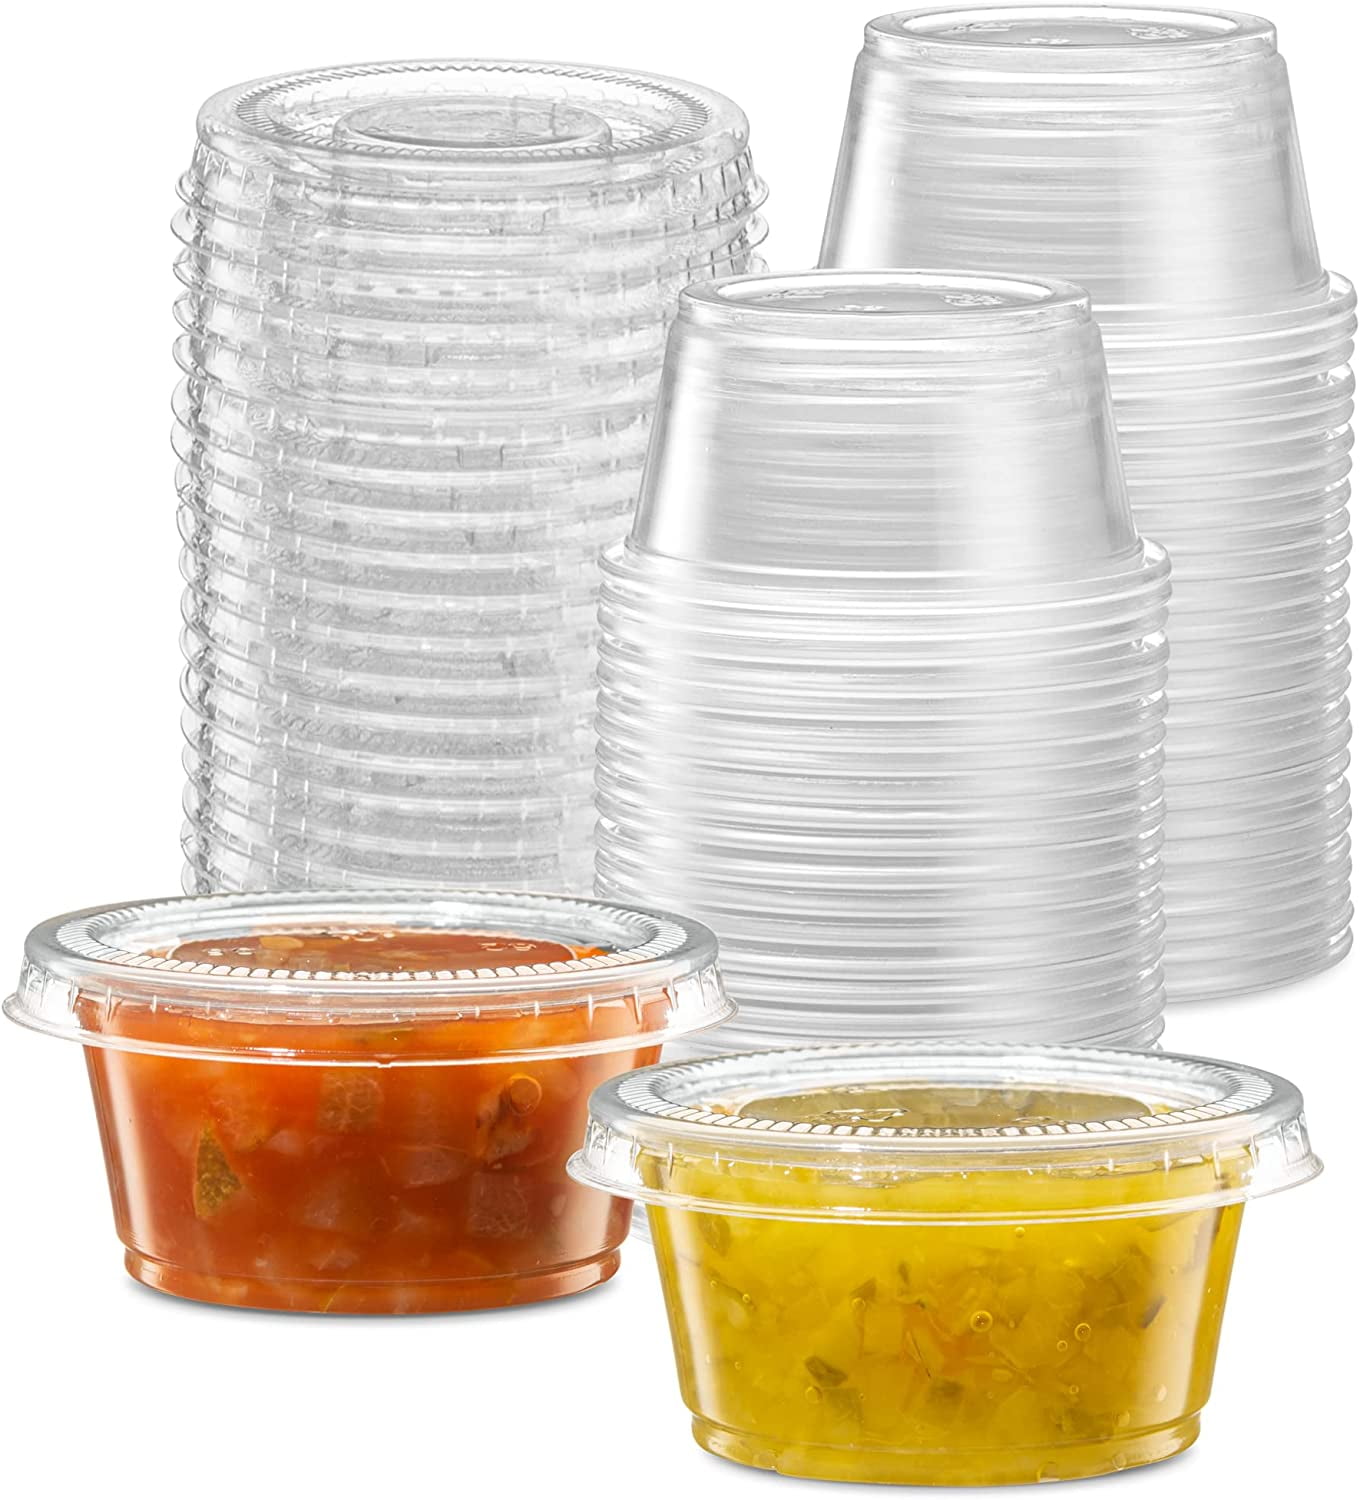 [200 Sets - 2 oz.] Small Plastic Containers with Lids, Jello Shot/  Condiment Cups, 2oz Dipping Sauce…See more [200 Sets - 2 oz.] Small Plastic